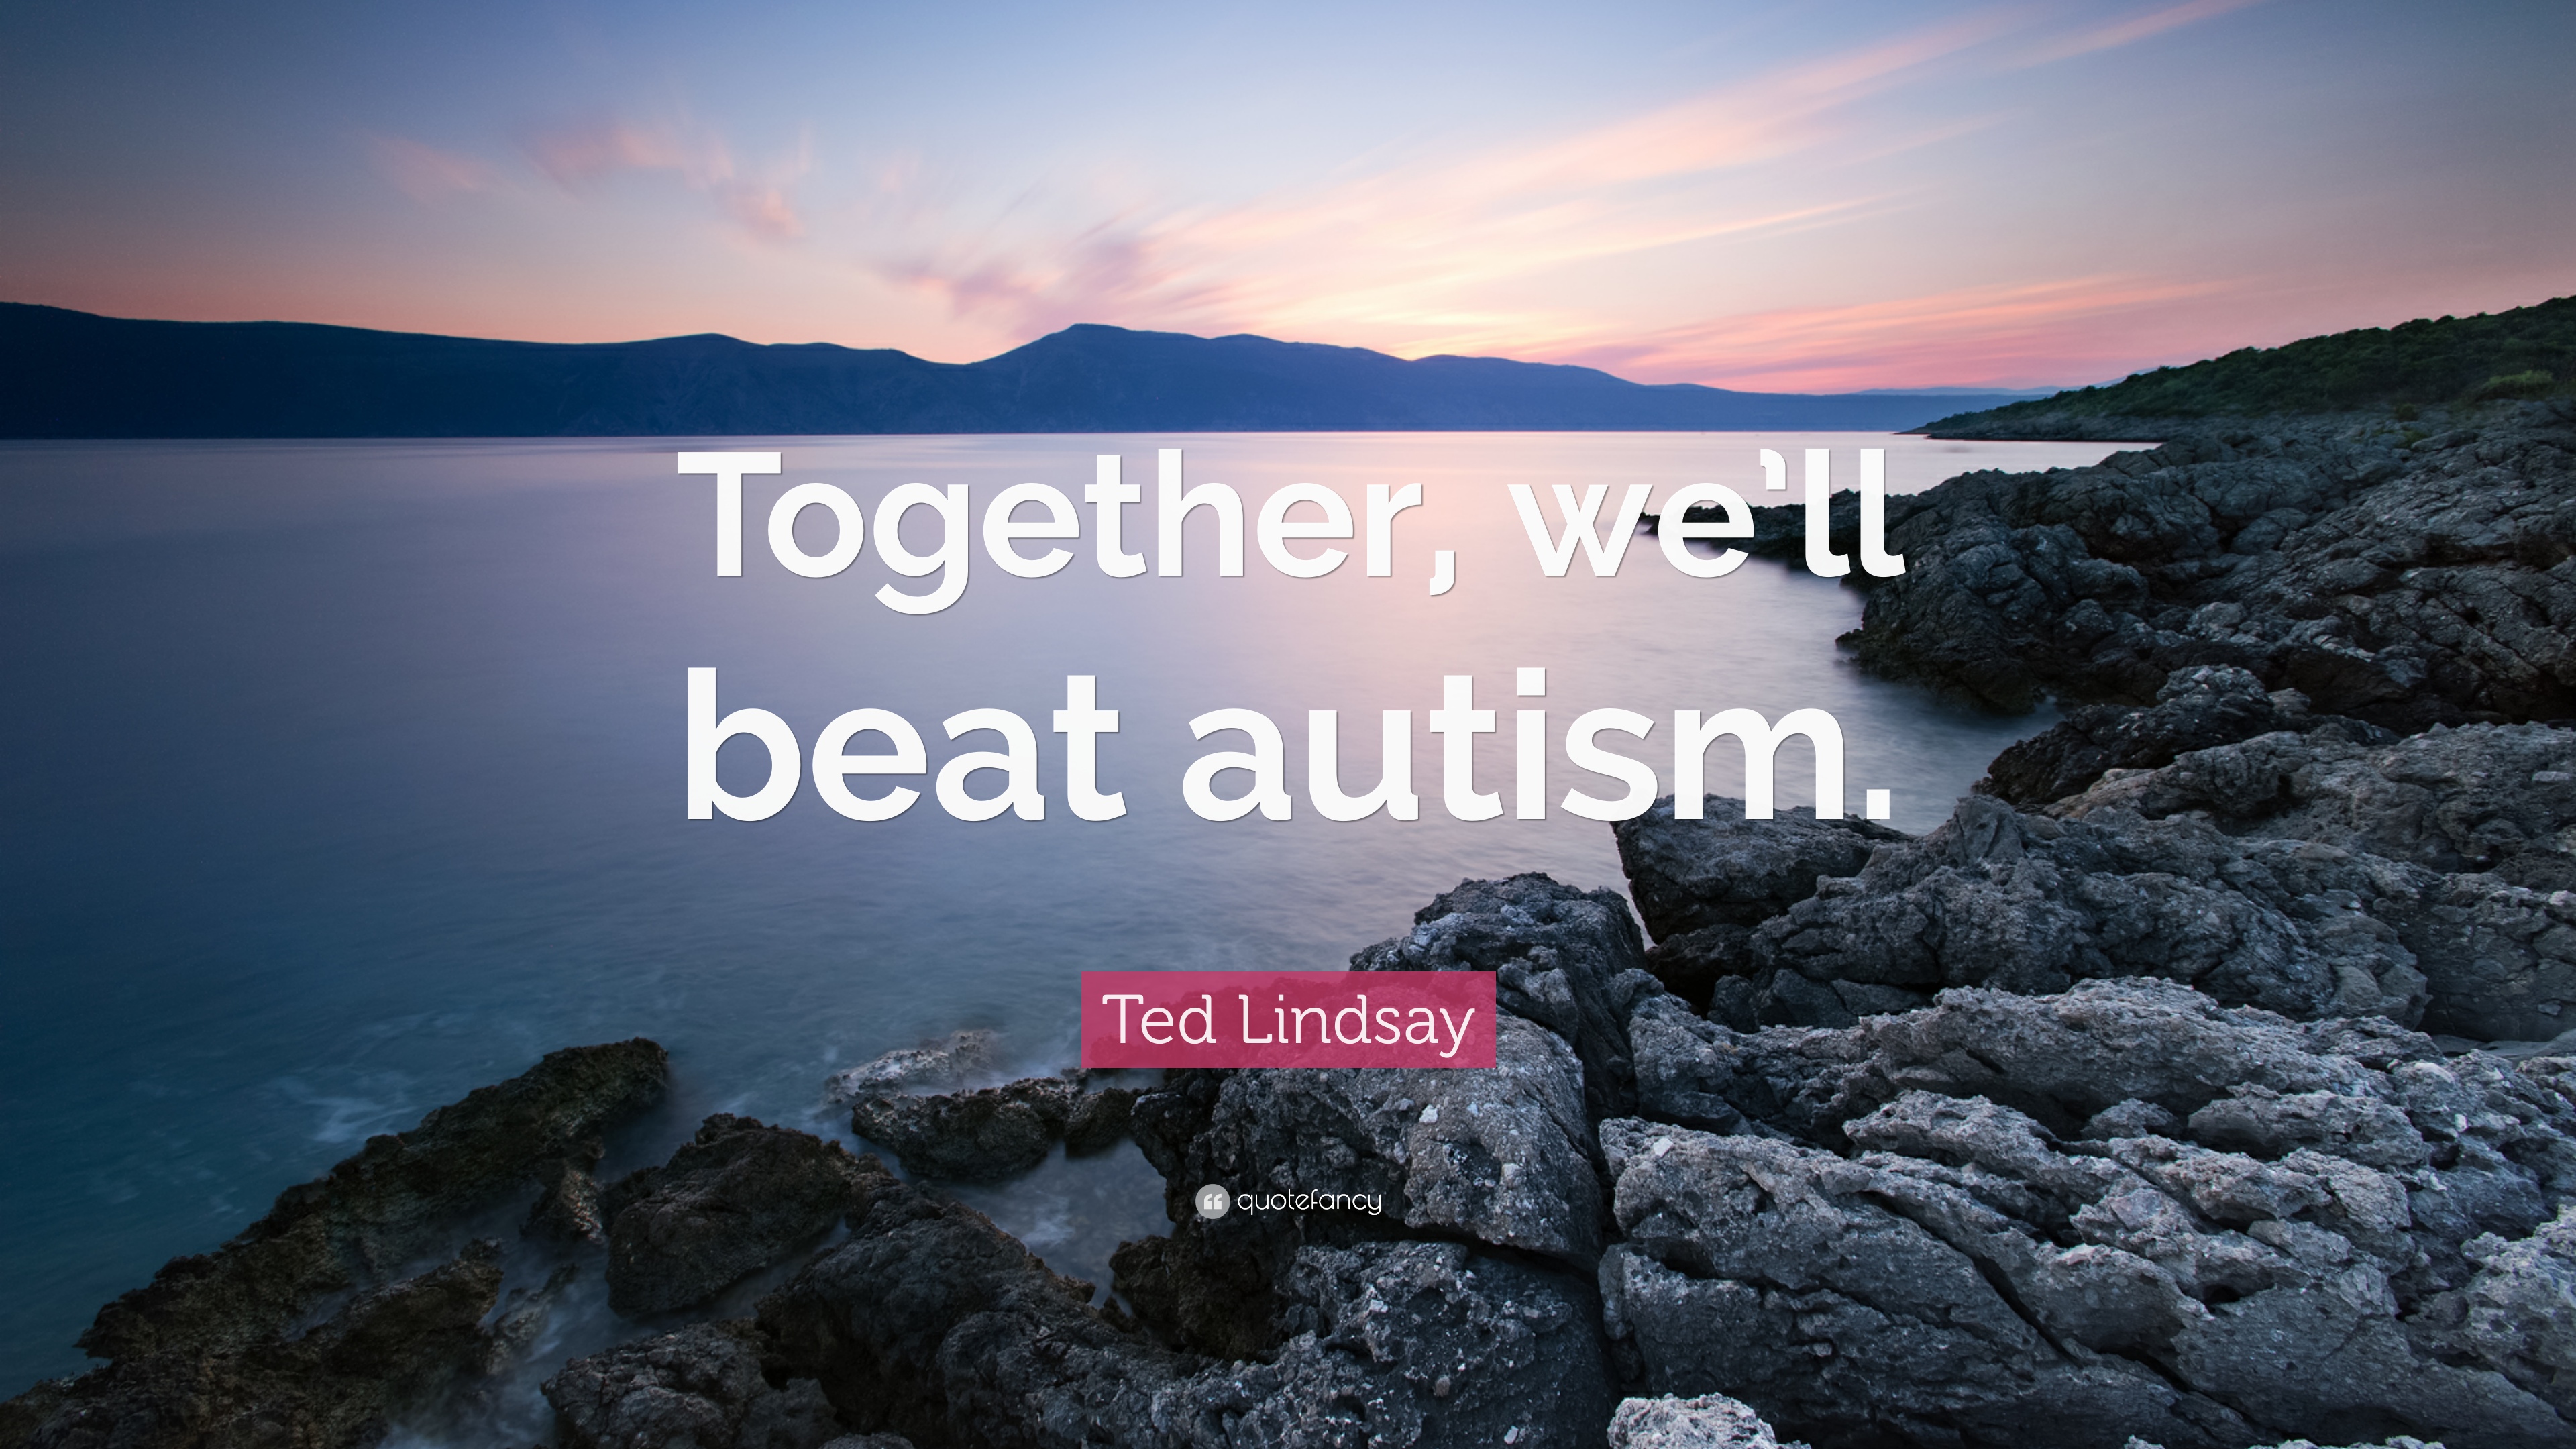 Ted Lindsay Quote: “Together, we'll beat autism.” 7 wallpaper